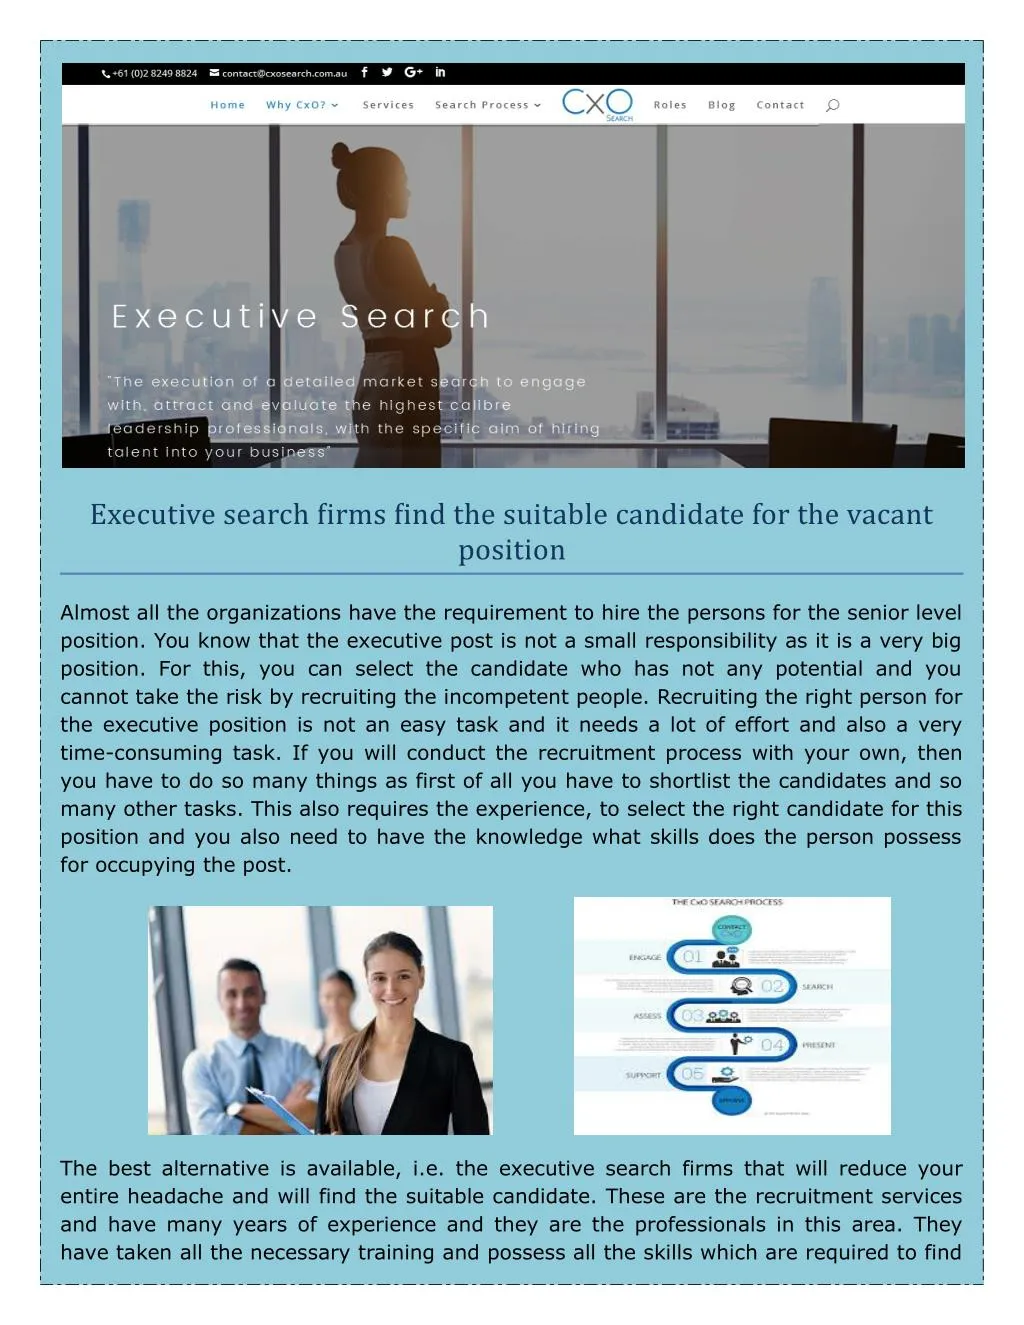 executive search firms find the suitable